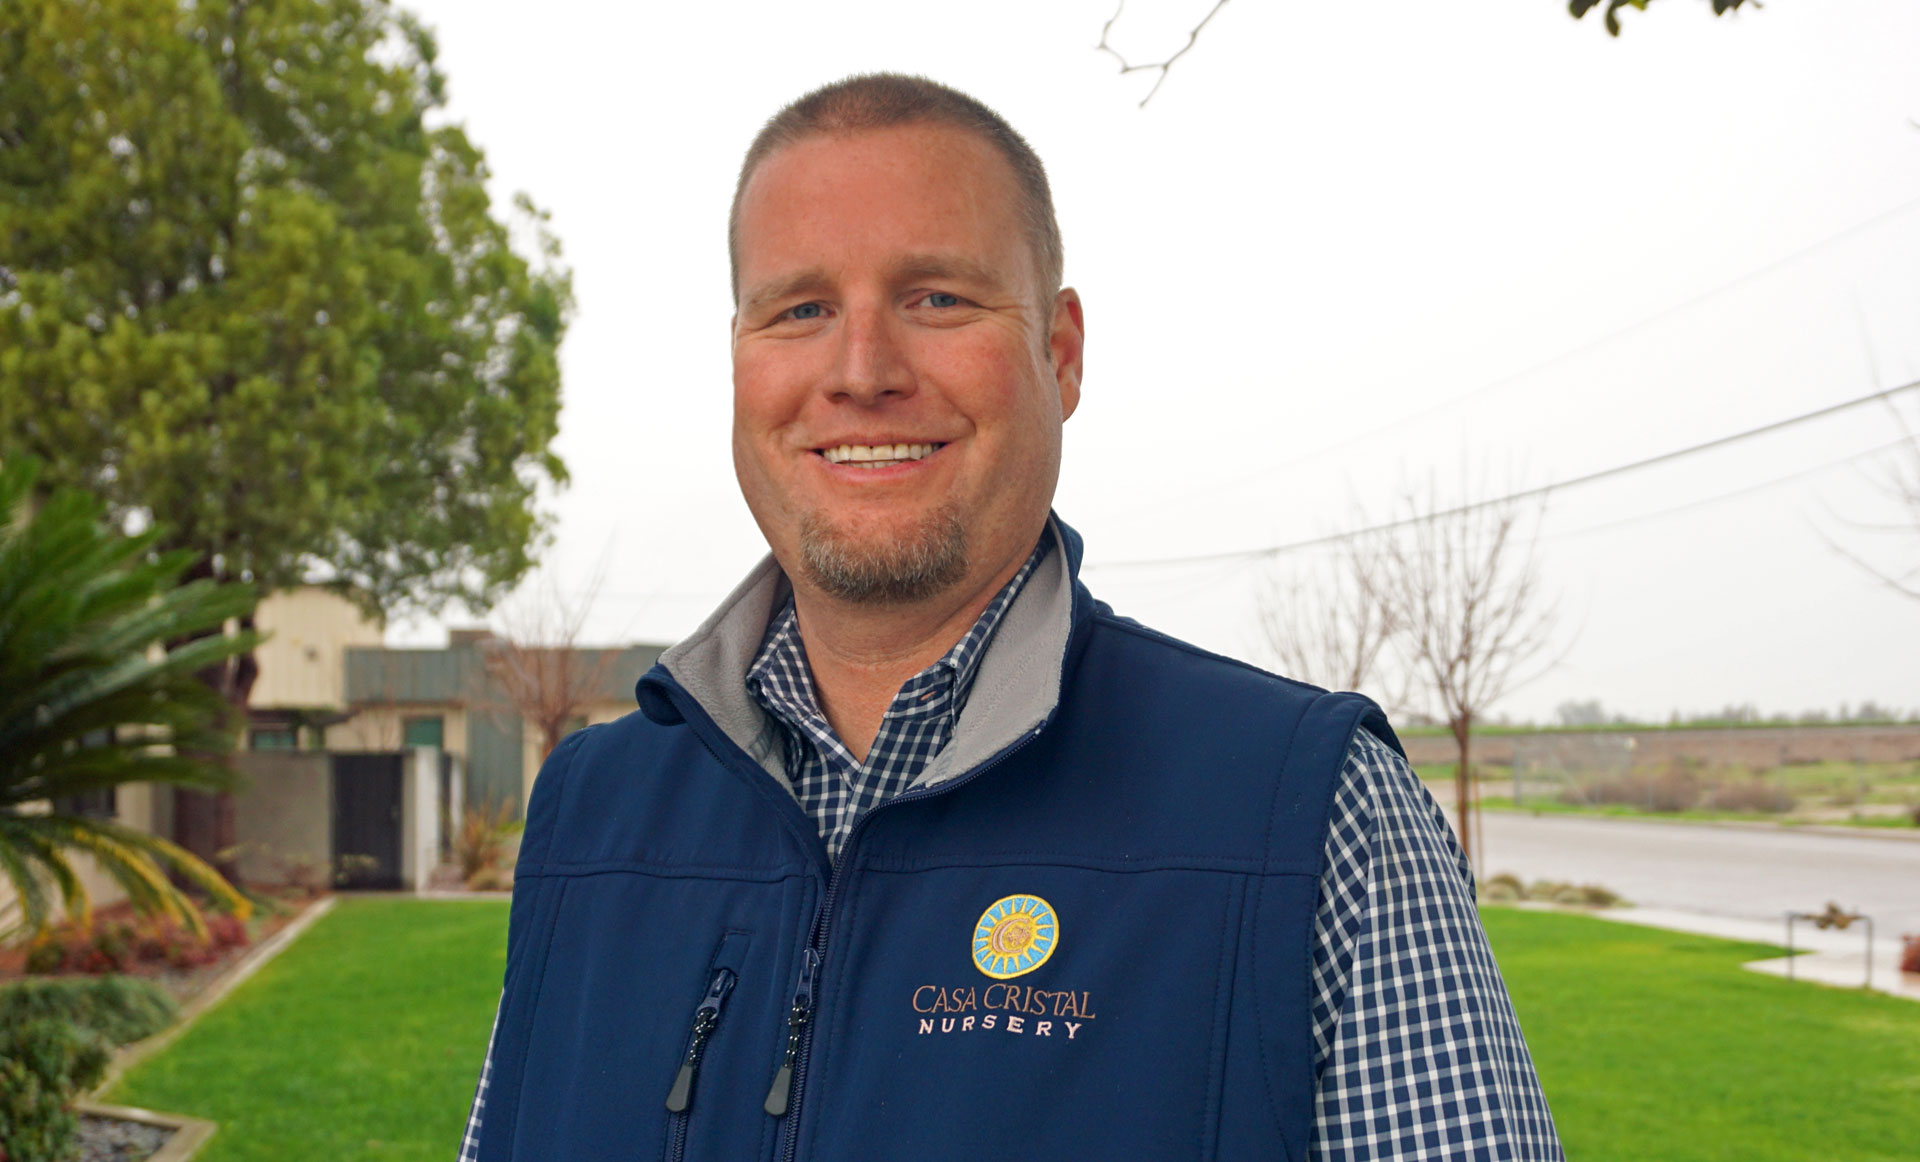 Chad Hathaway owns an oil company in Bakersfield.